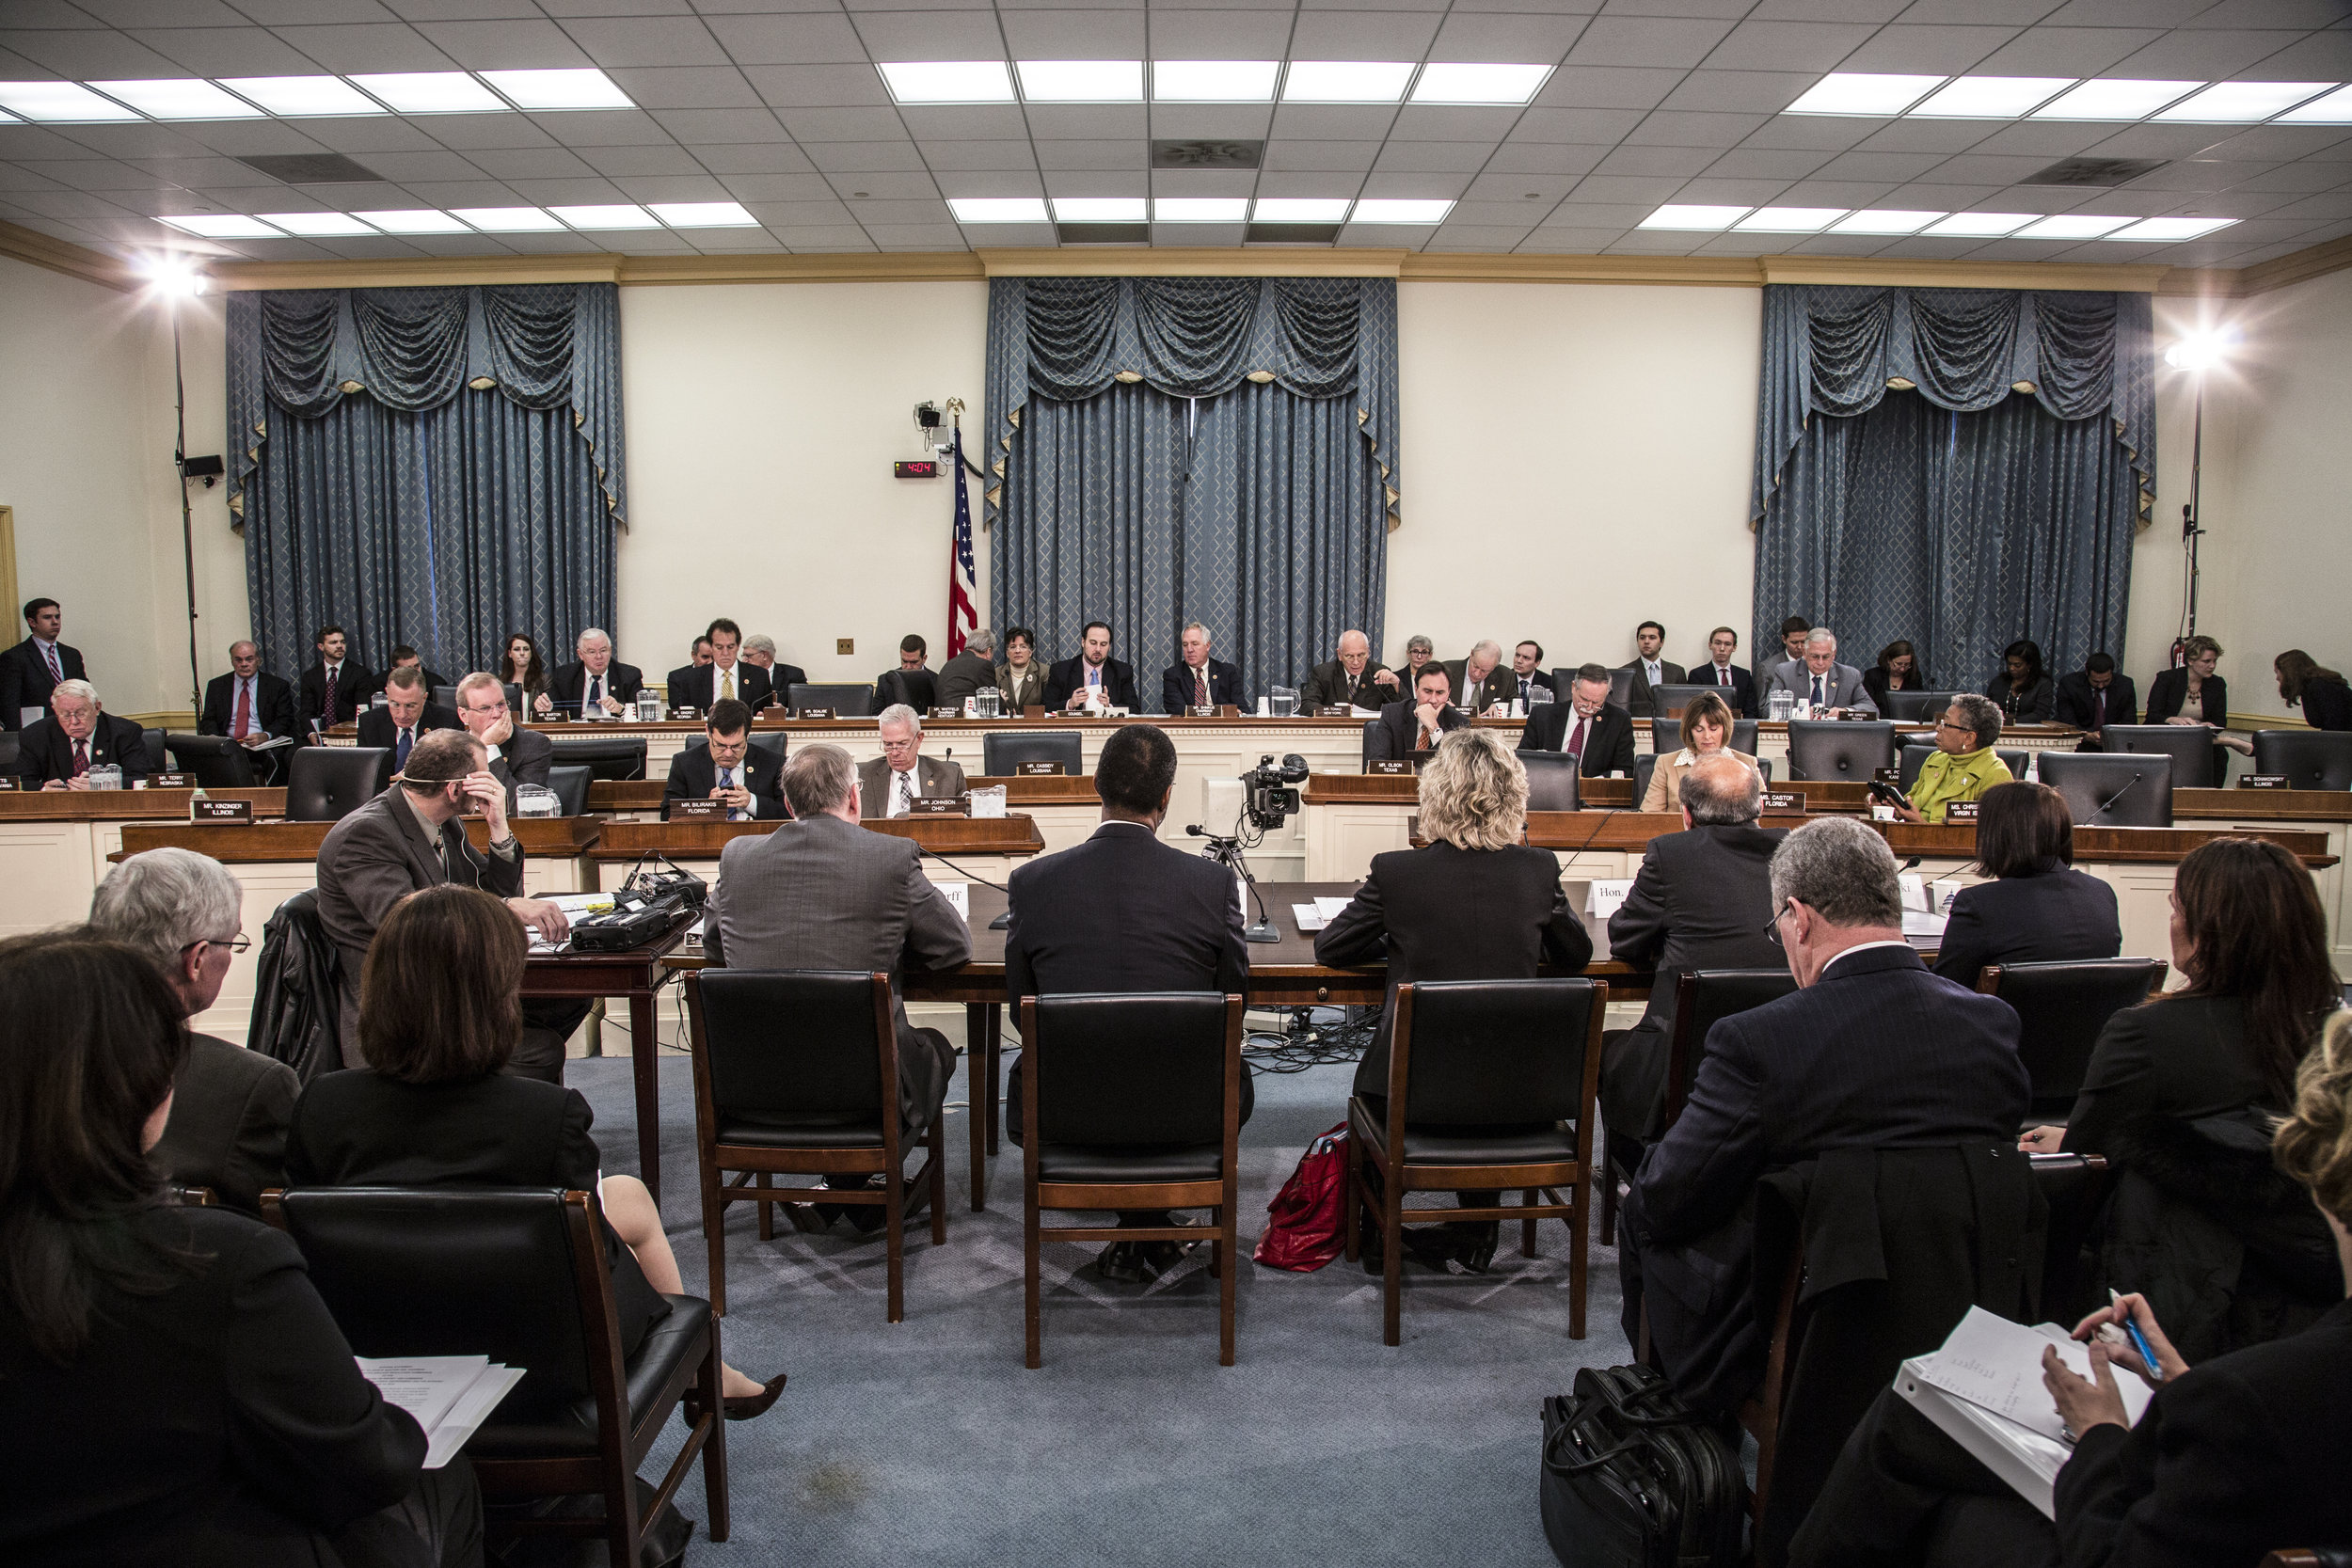 2013 12 Committee on Energy and Commerce Hearing on Oversight of NRC Management and the Need for Legislative Reform24.jpg